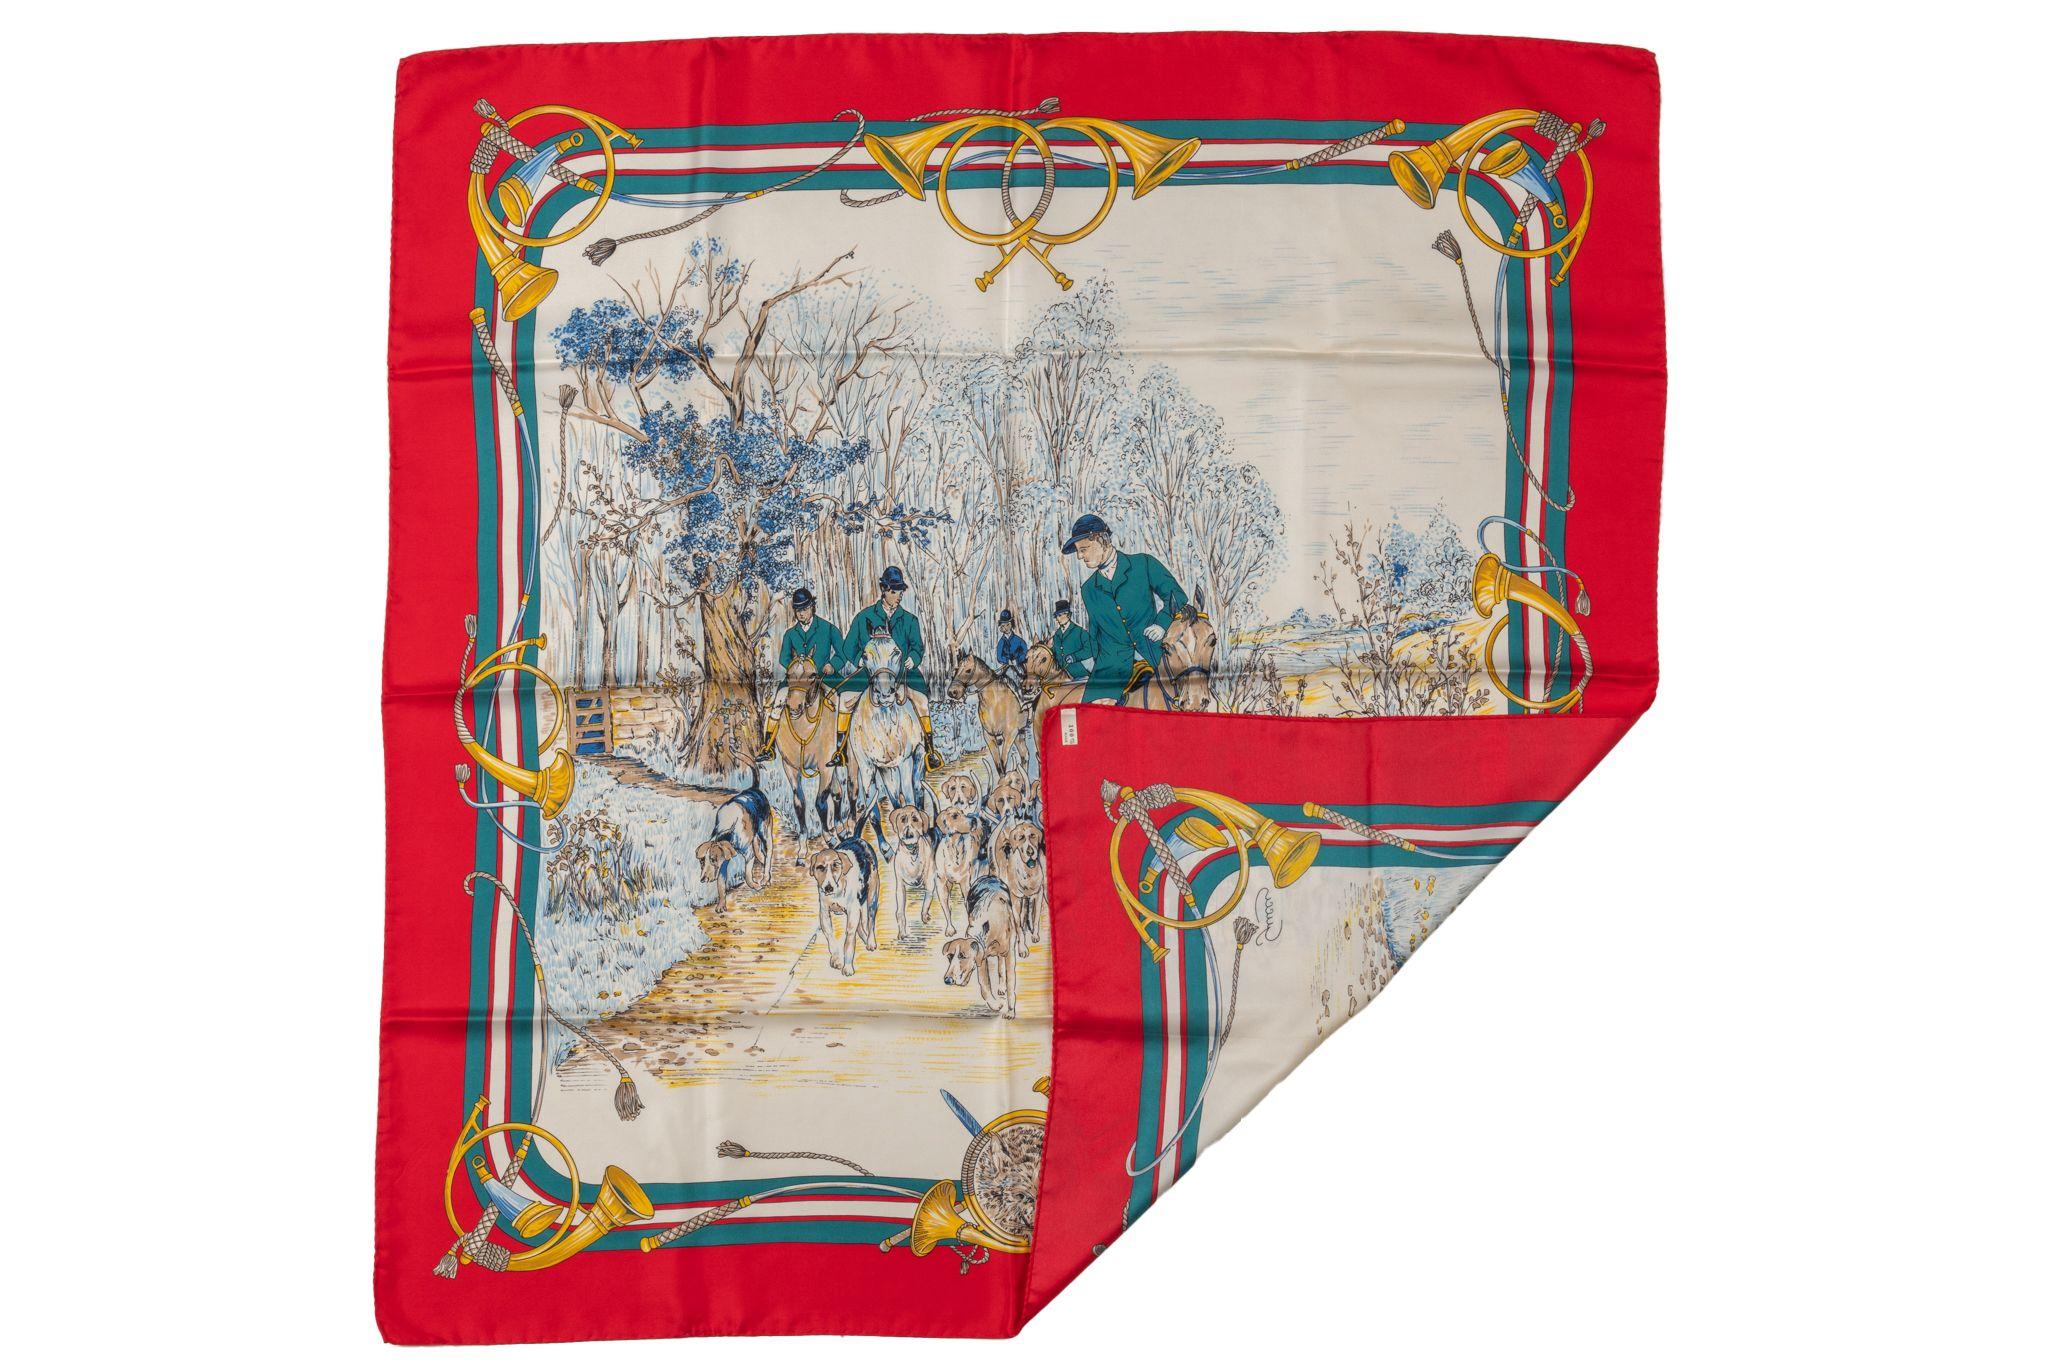 Gucci vintage hunting scene silk scarf. Red trim and celeste details. Hand rolled edges.
No box.